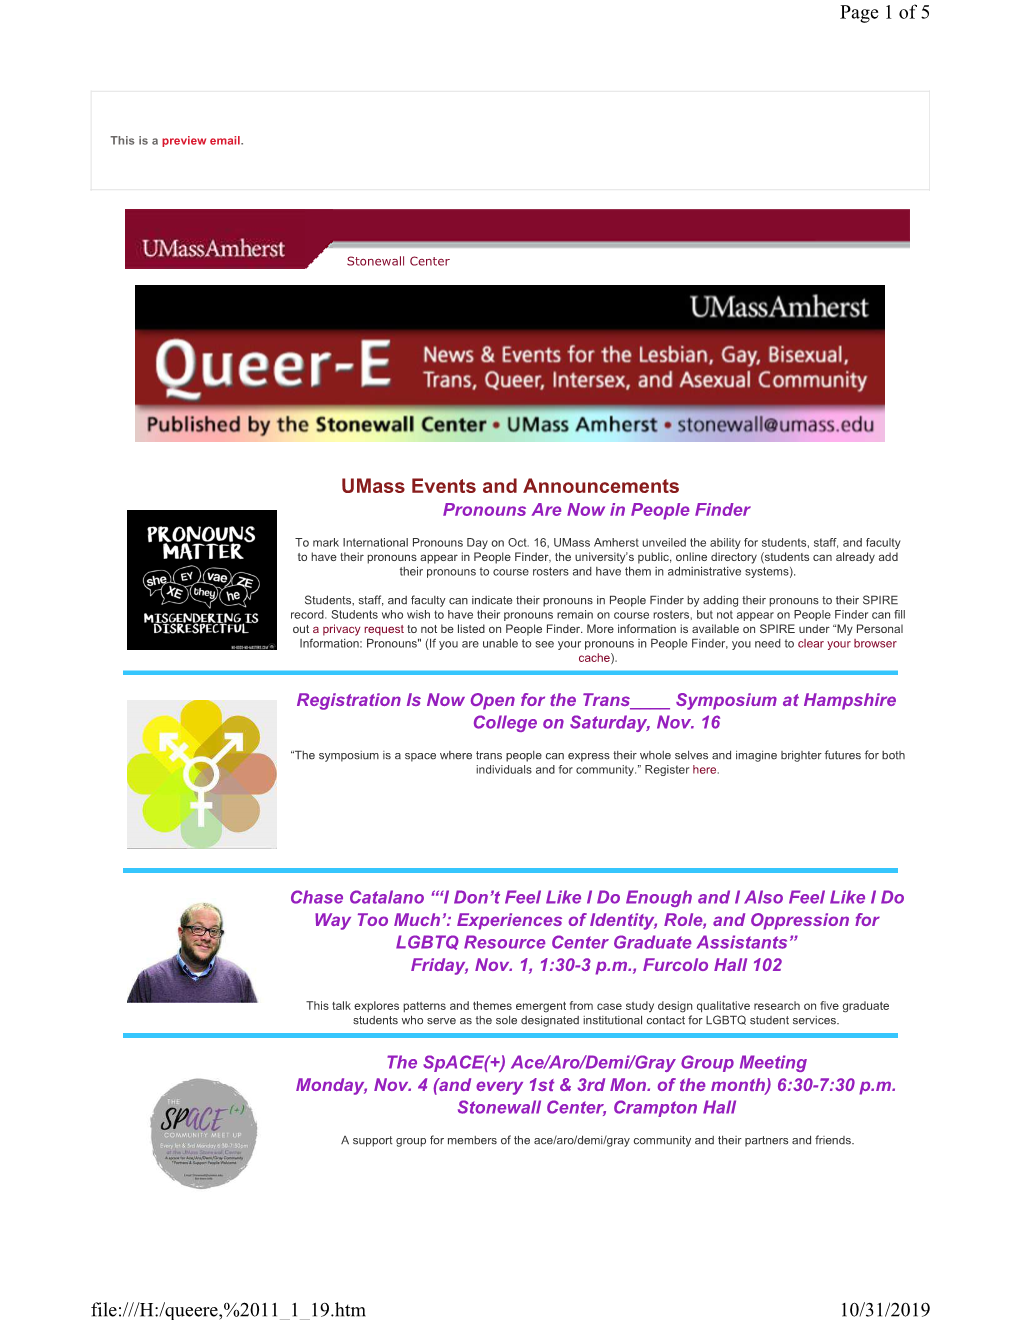 Umass Events and Announcements Page 1 of 5 10/31/2019 File:///H